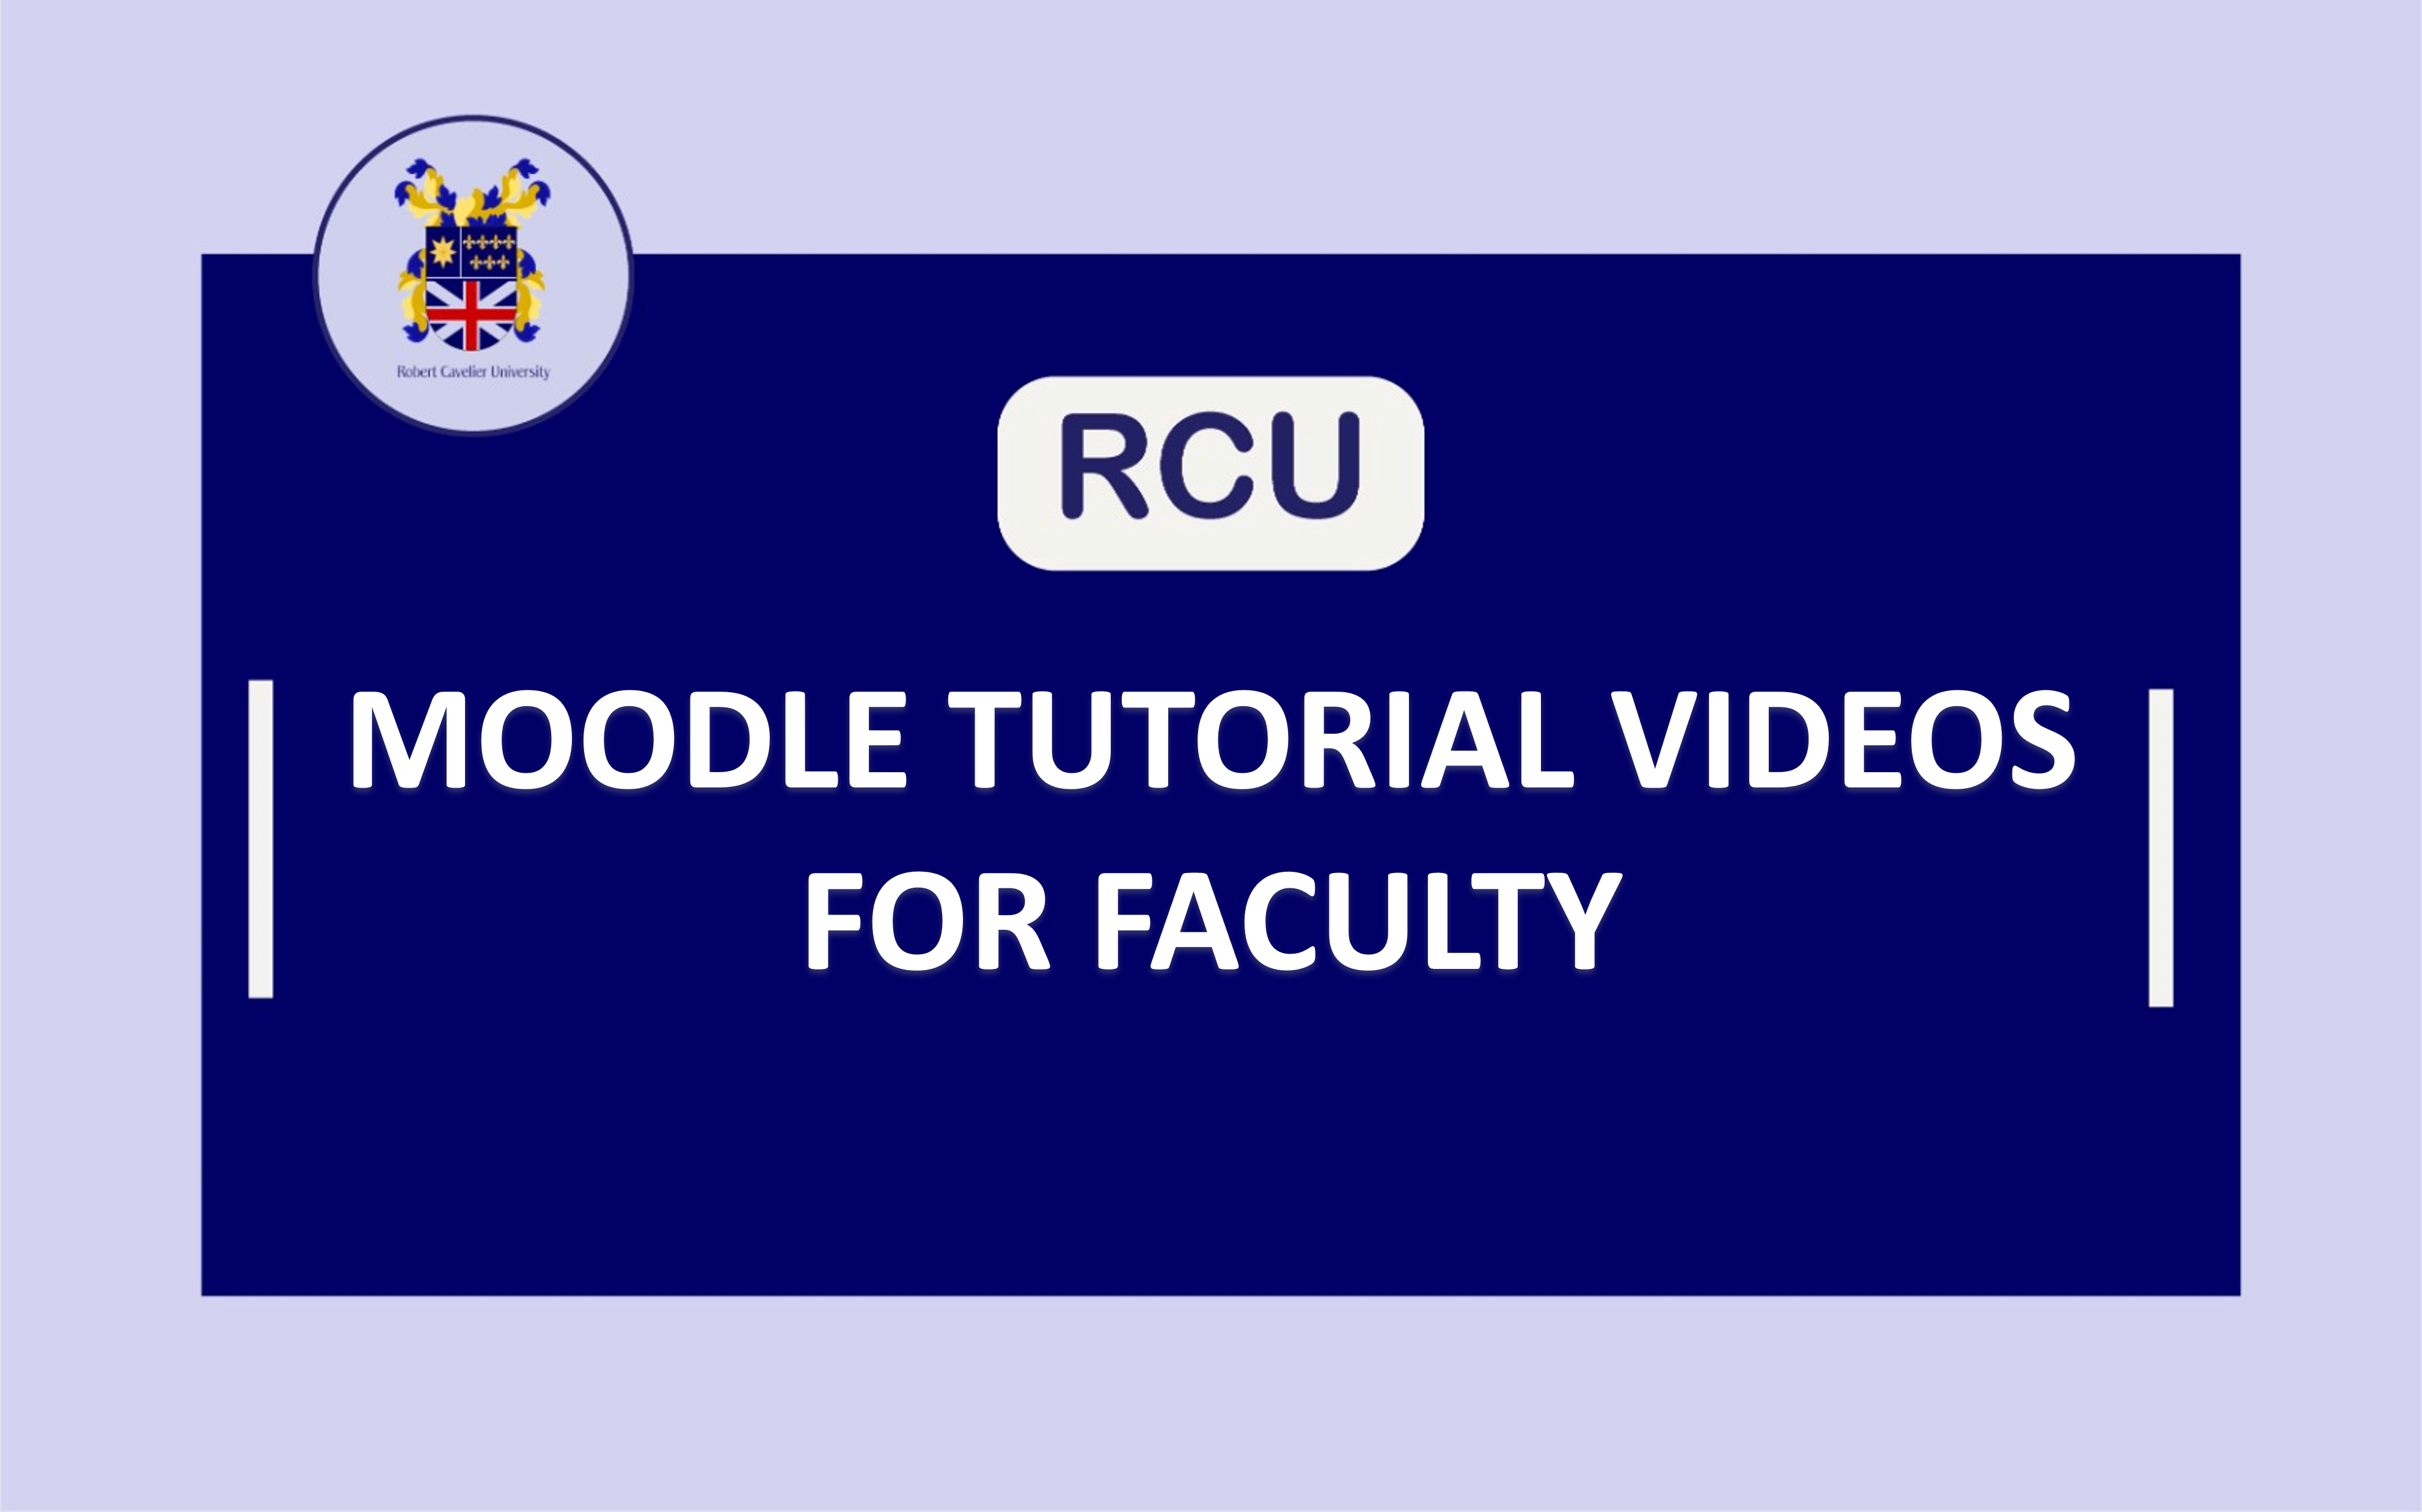 Moodle Tutorial Videos for Faculty